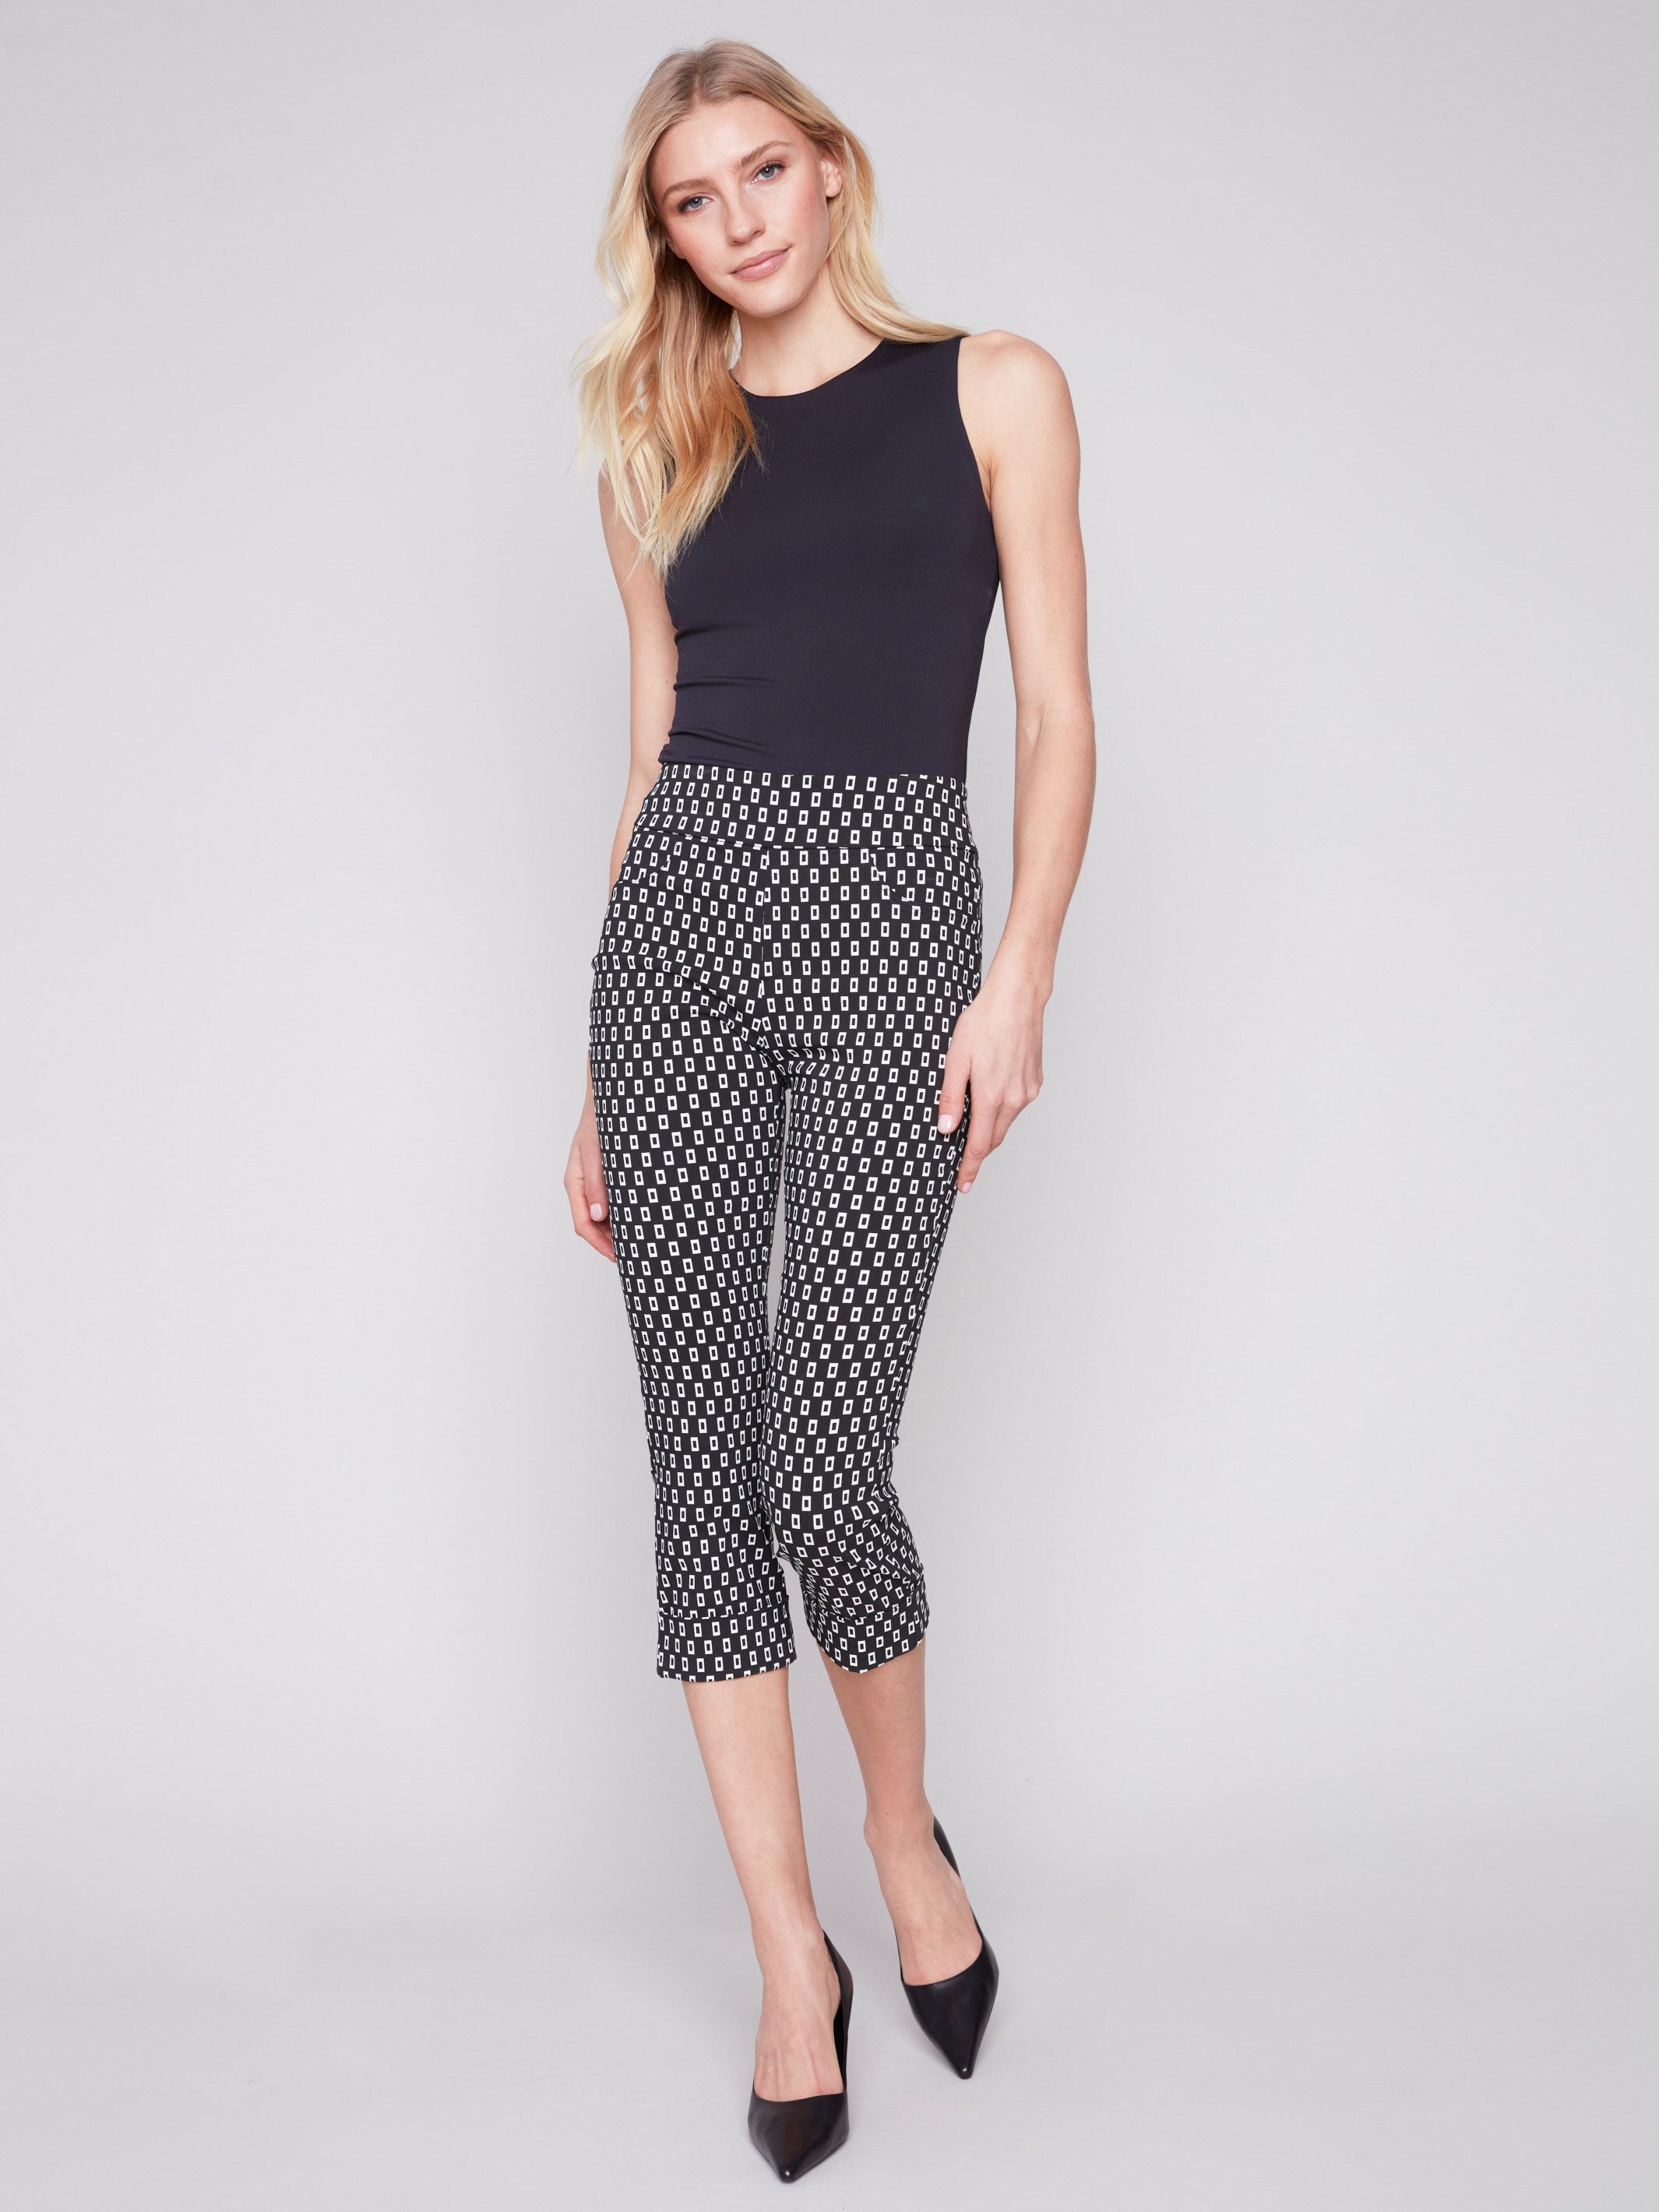 Printed Stretch Pull-On Capri Pants - White Tiles - Charlie B Collection Canada - Image 4